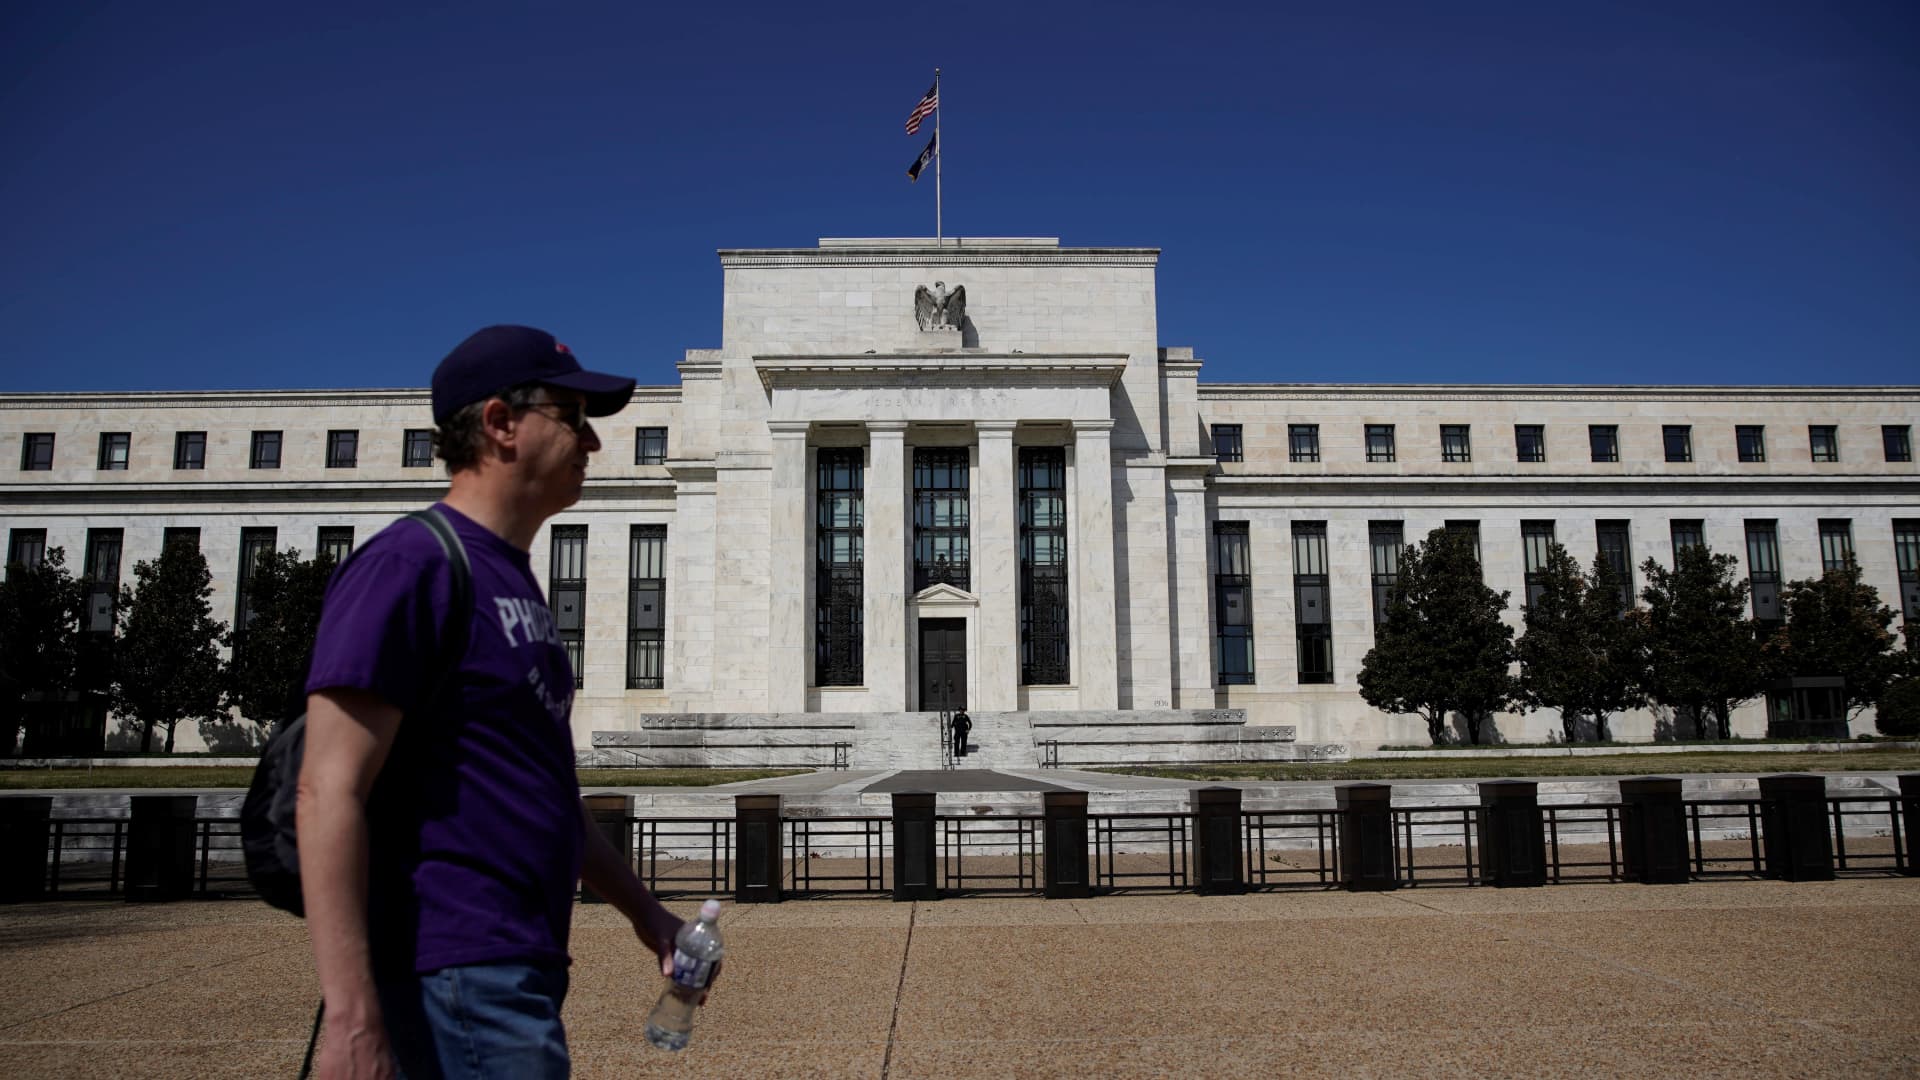 Central banks need to put rates into the ‘pain zone’ — but the Fed won’t do it, fund manager says